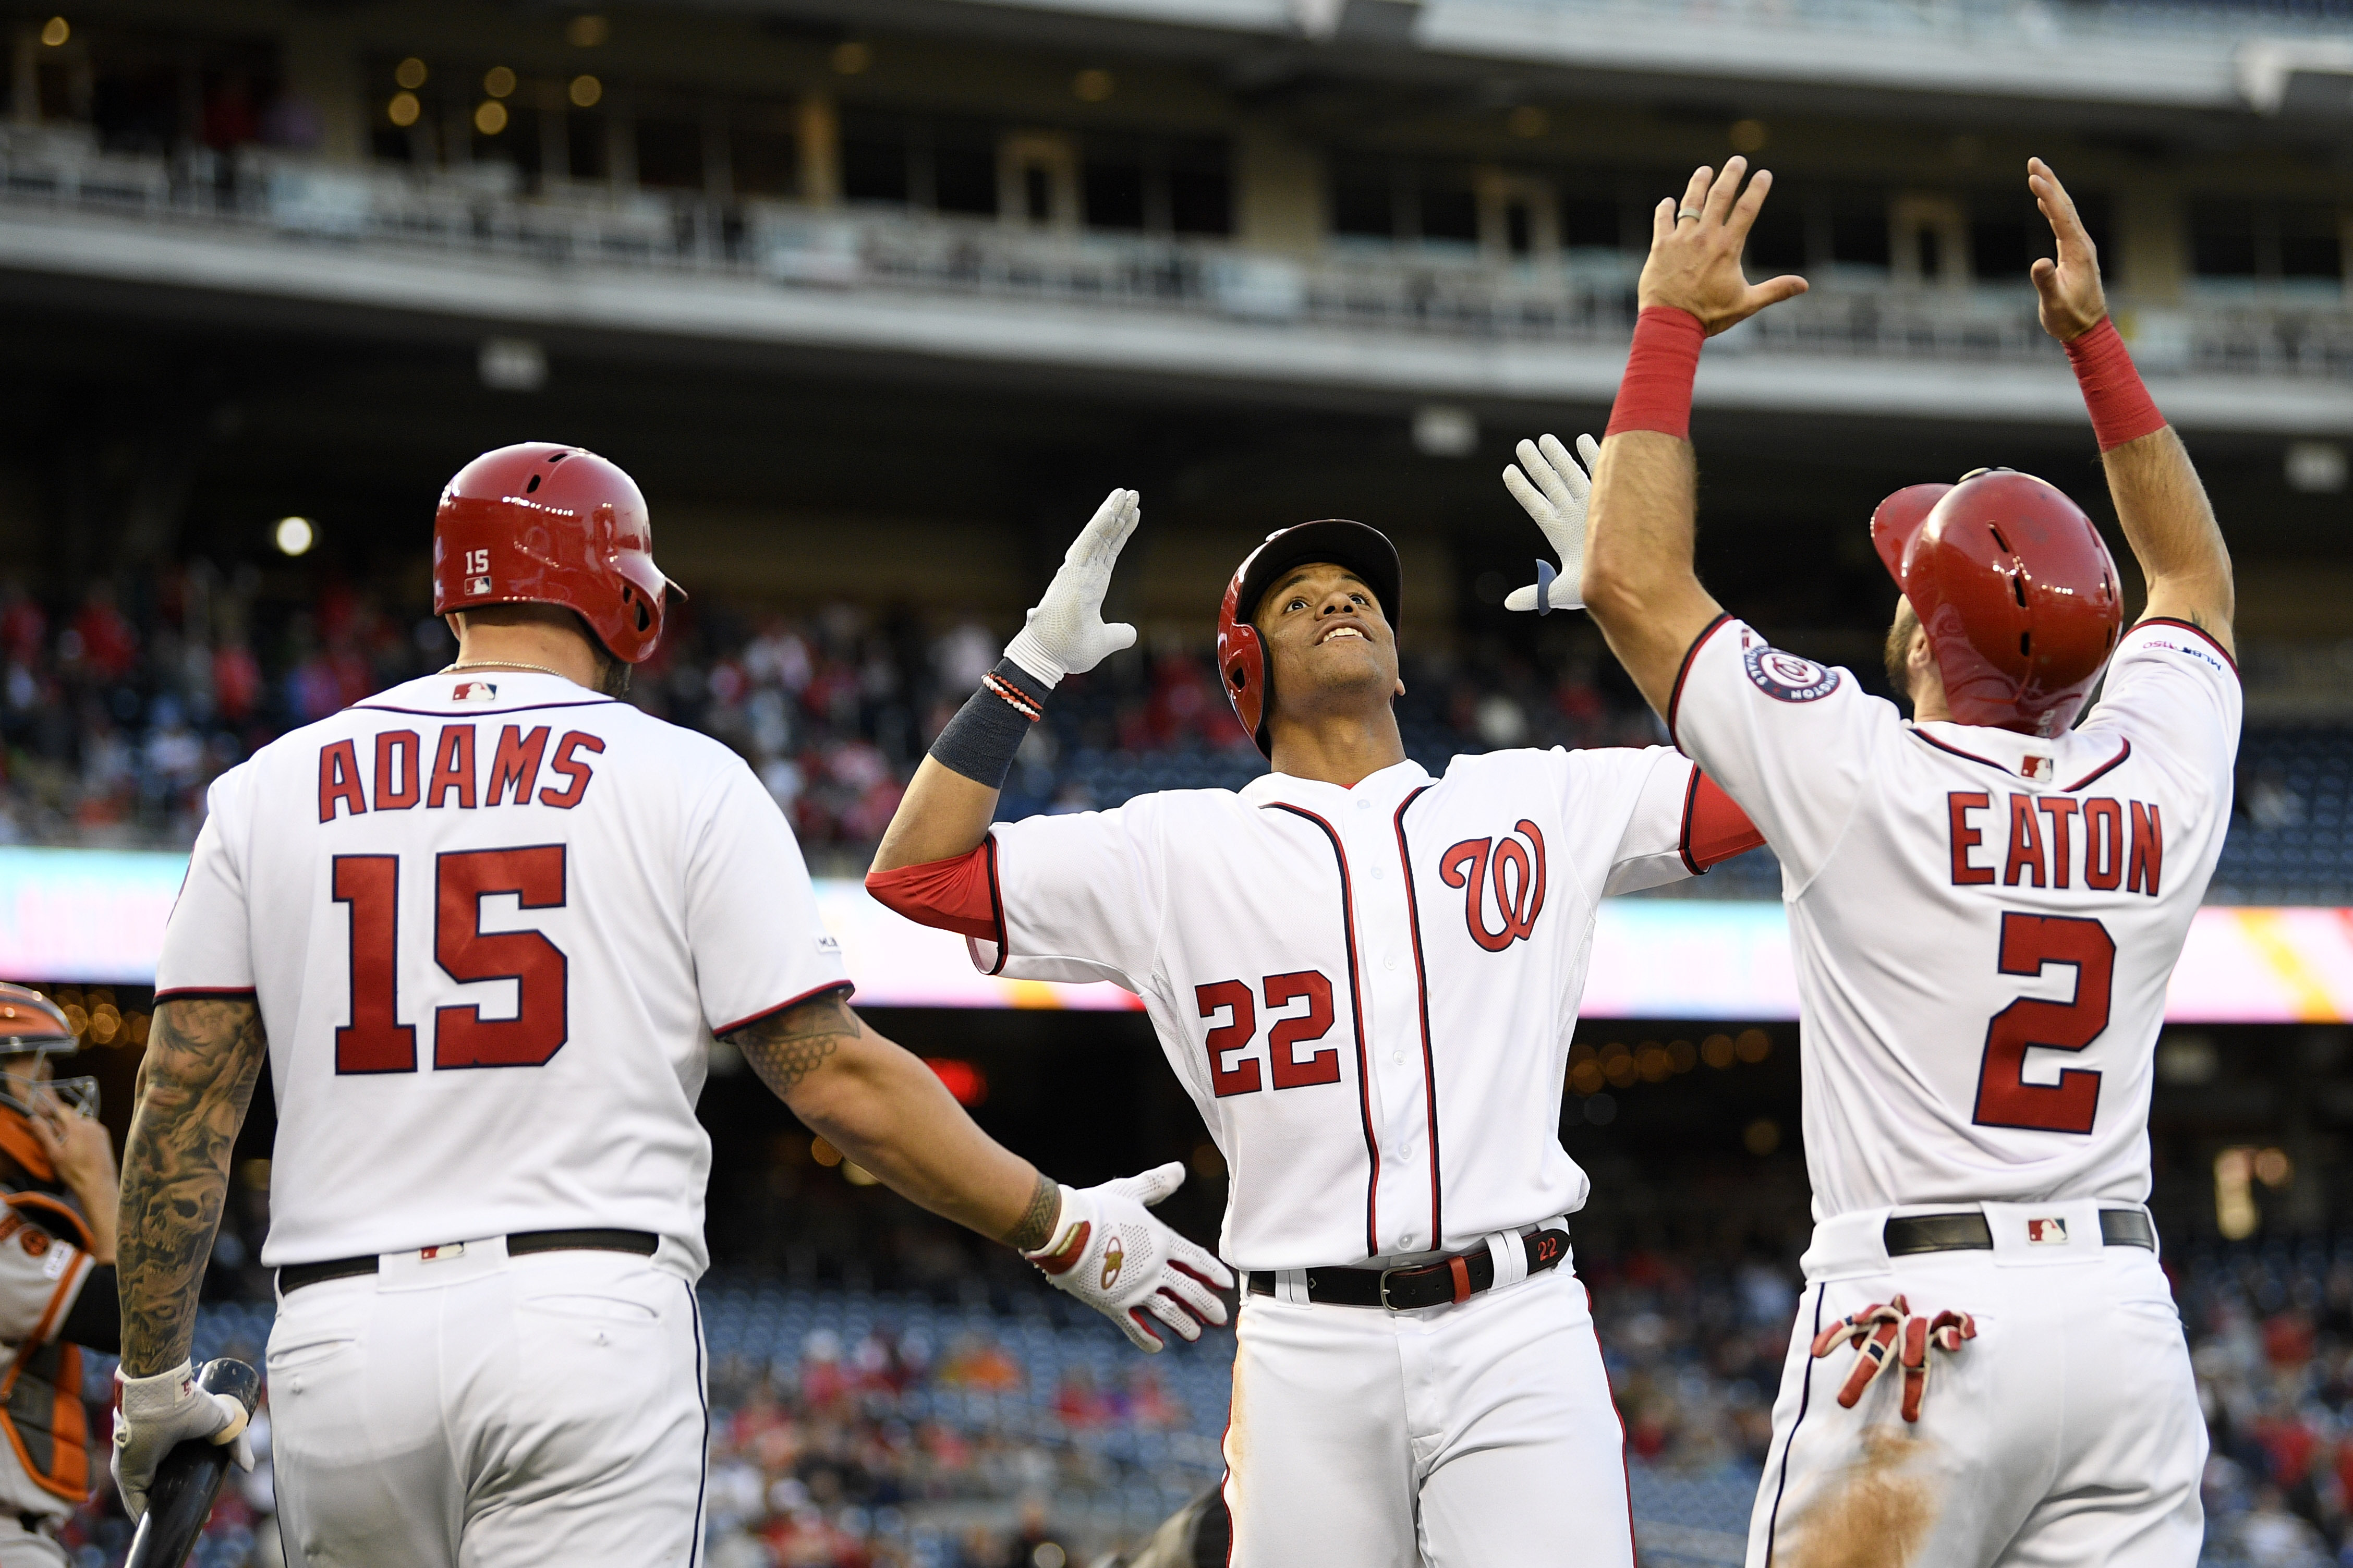 Nationals hit 4 HRs in 9-6 victory over Giants